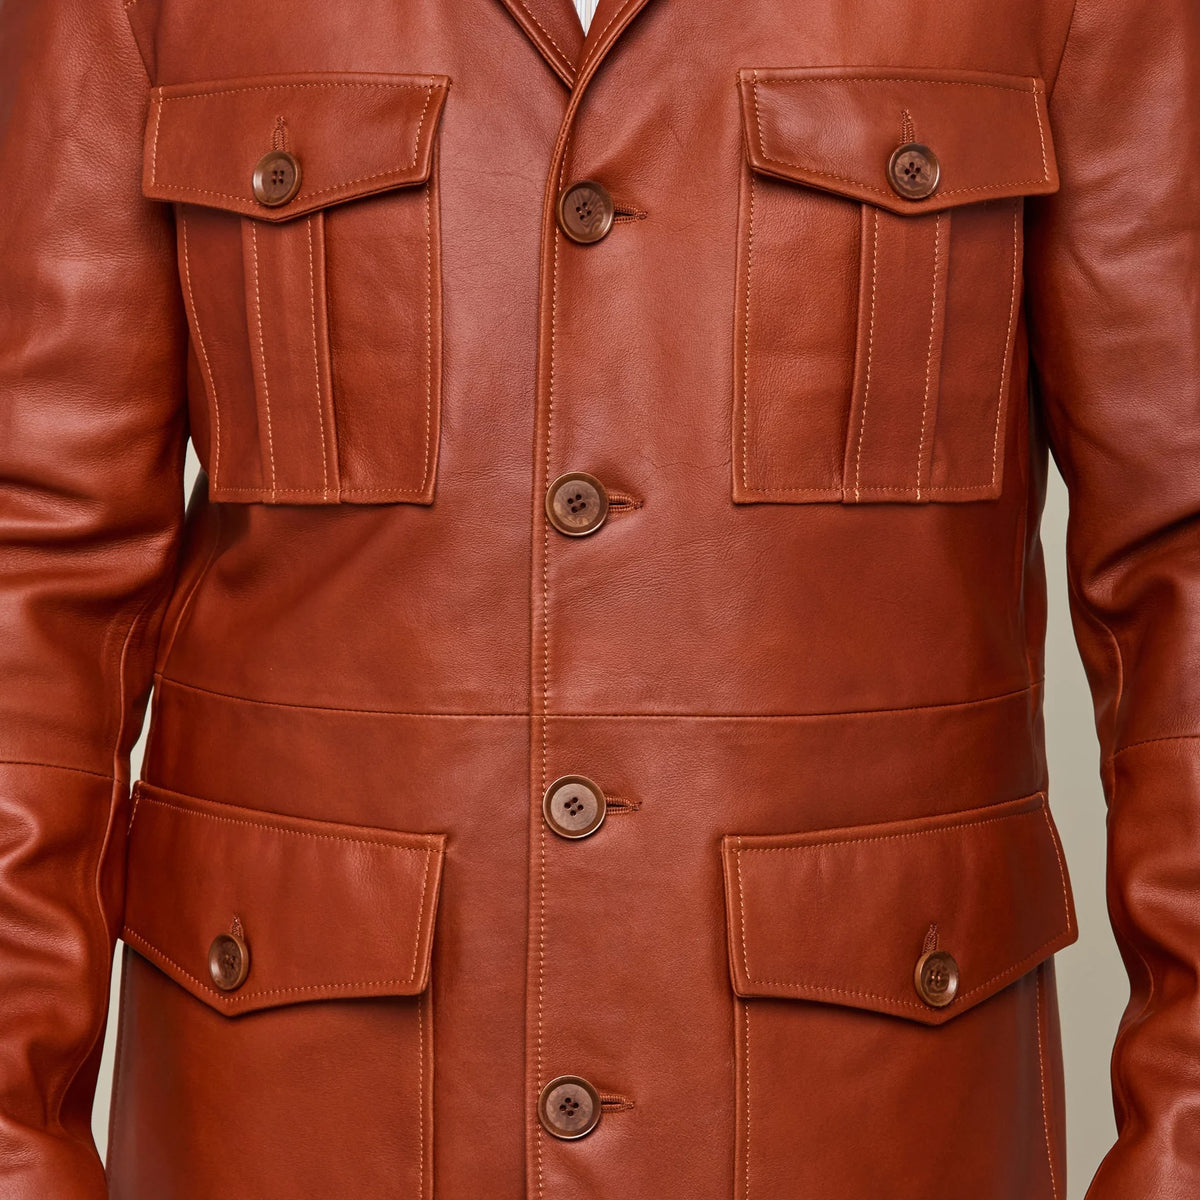 Picture of a model wearing our Leather cargo Jacket, brown color, close up front view showing all 4 pockets.